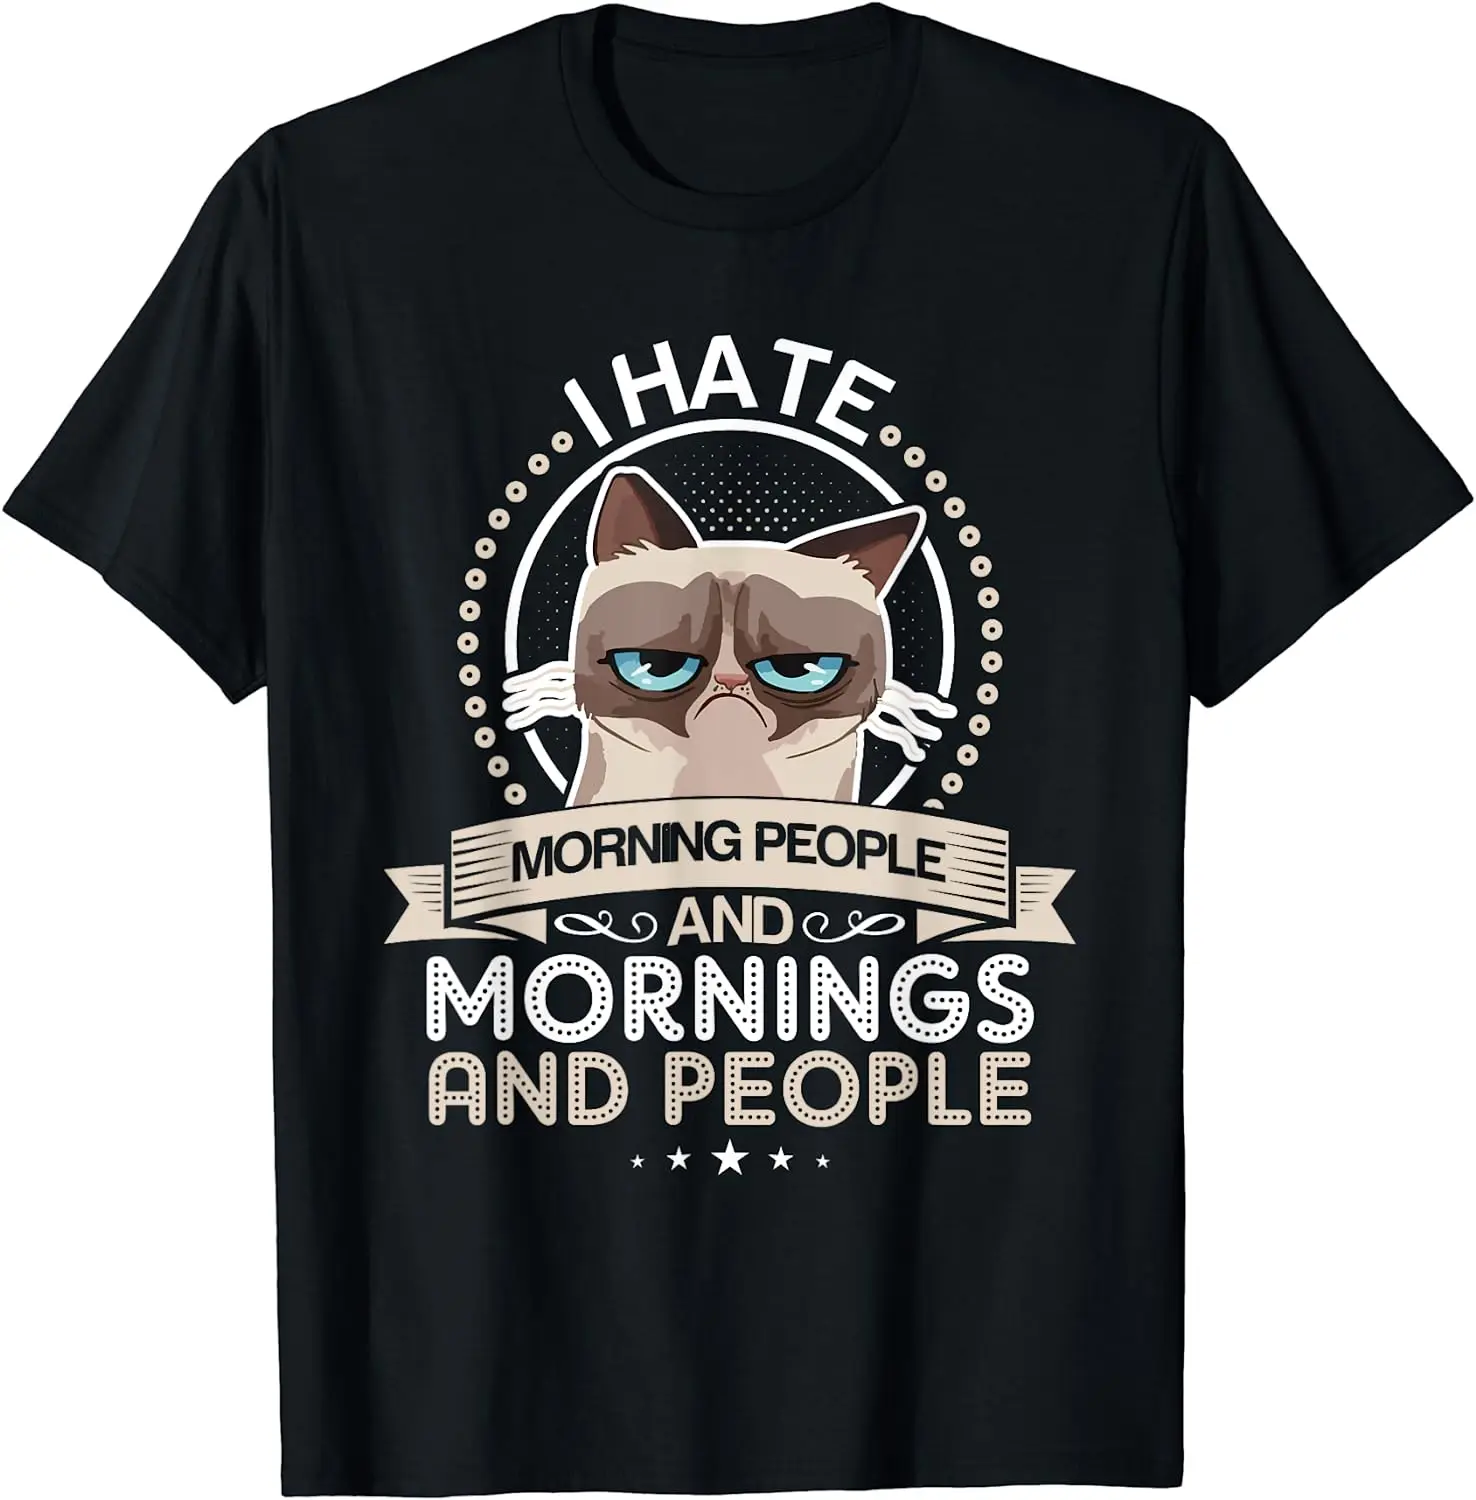 

I Don't Like Morning People OR Mornings OR People Cat TShirt Graphic T Shirts Casual Cotton Daily Four Seasons Tees Men T Shirt